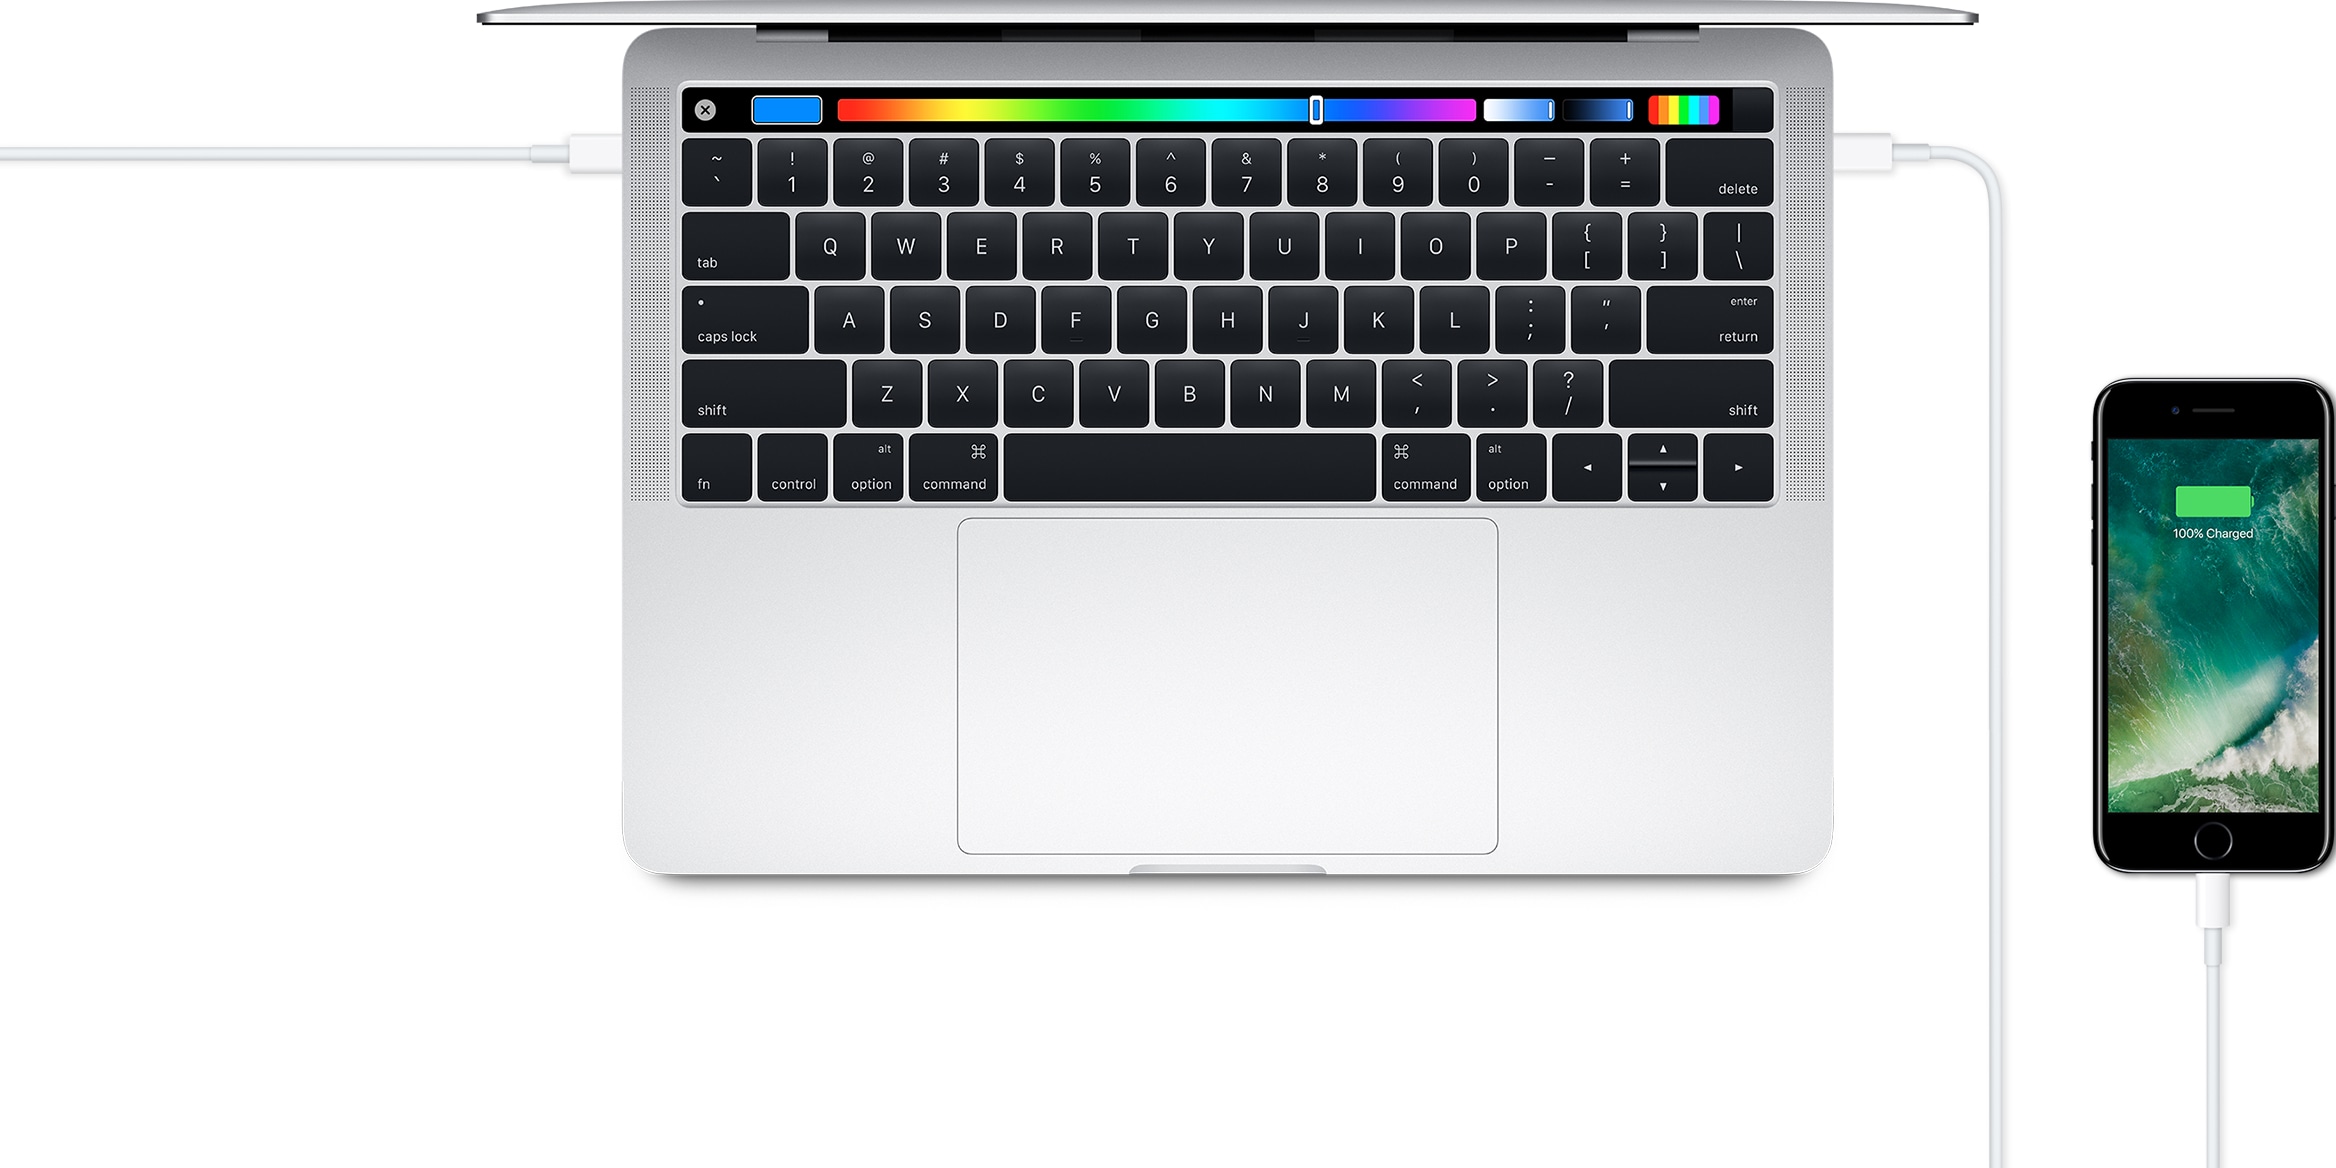 MacBook Pro with Thunderbolt 3